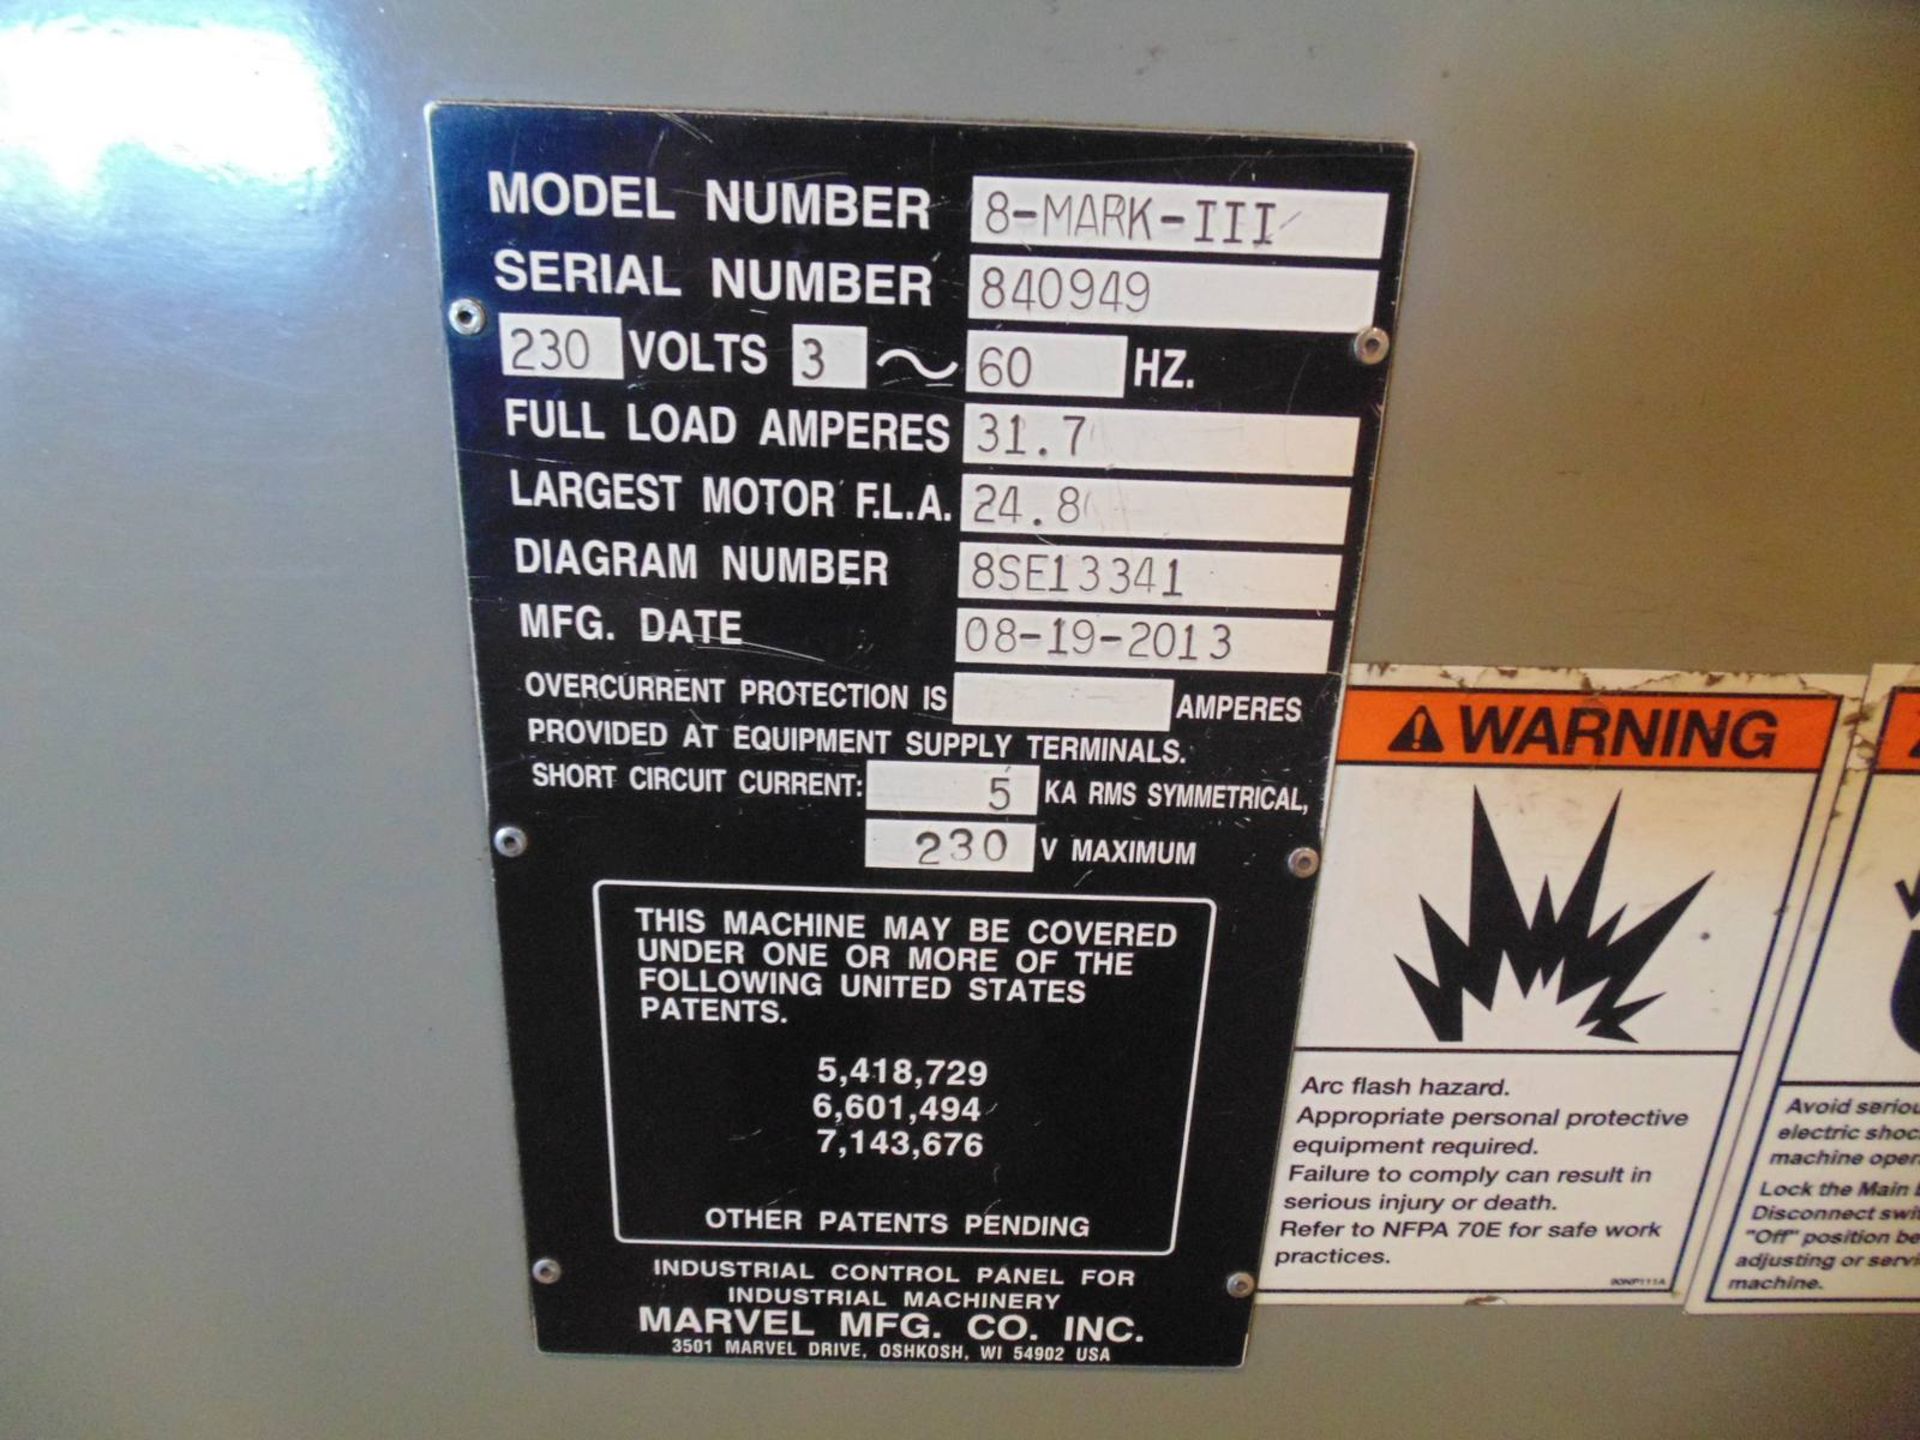 Marvel Model 8-Mark-lll 18" x 22" Vertical Band Saw - Image 7 of 7